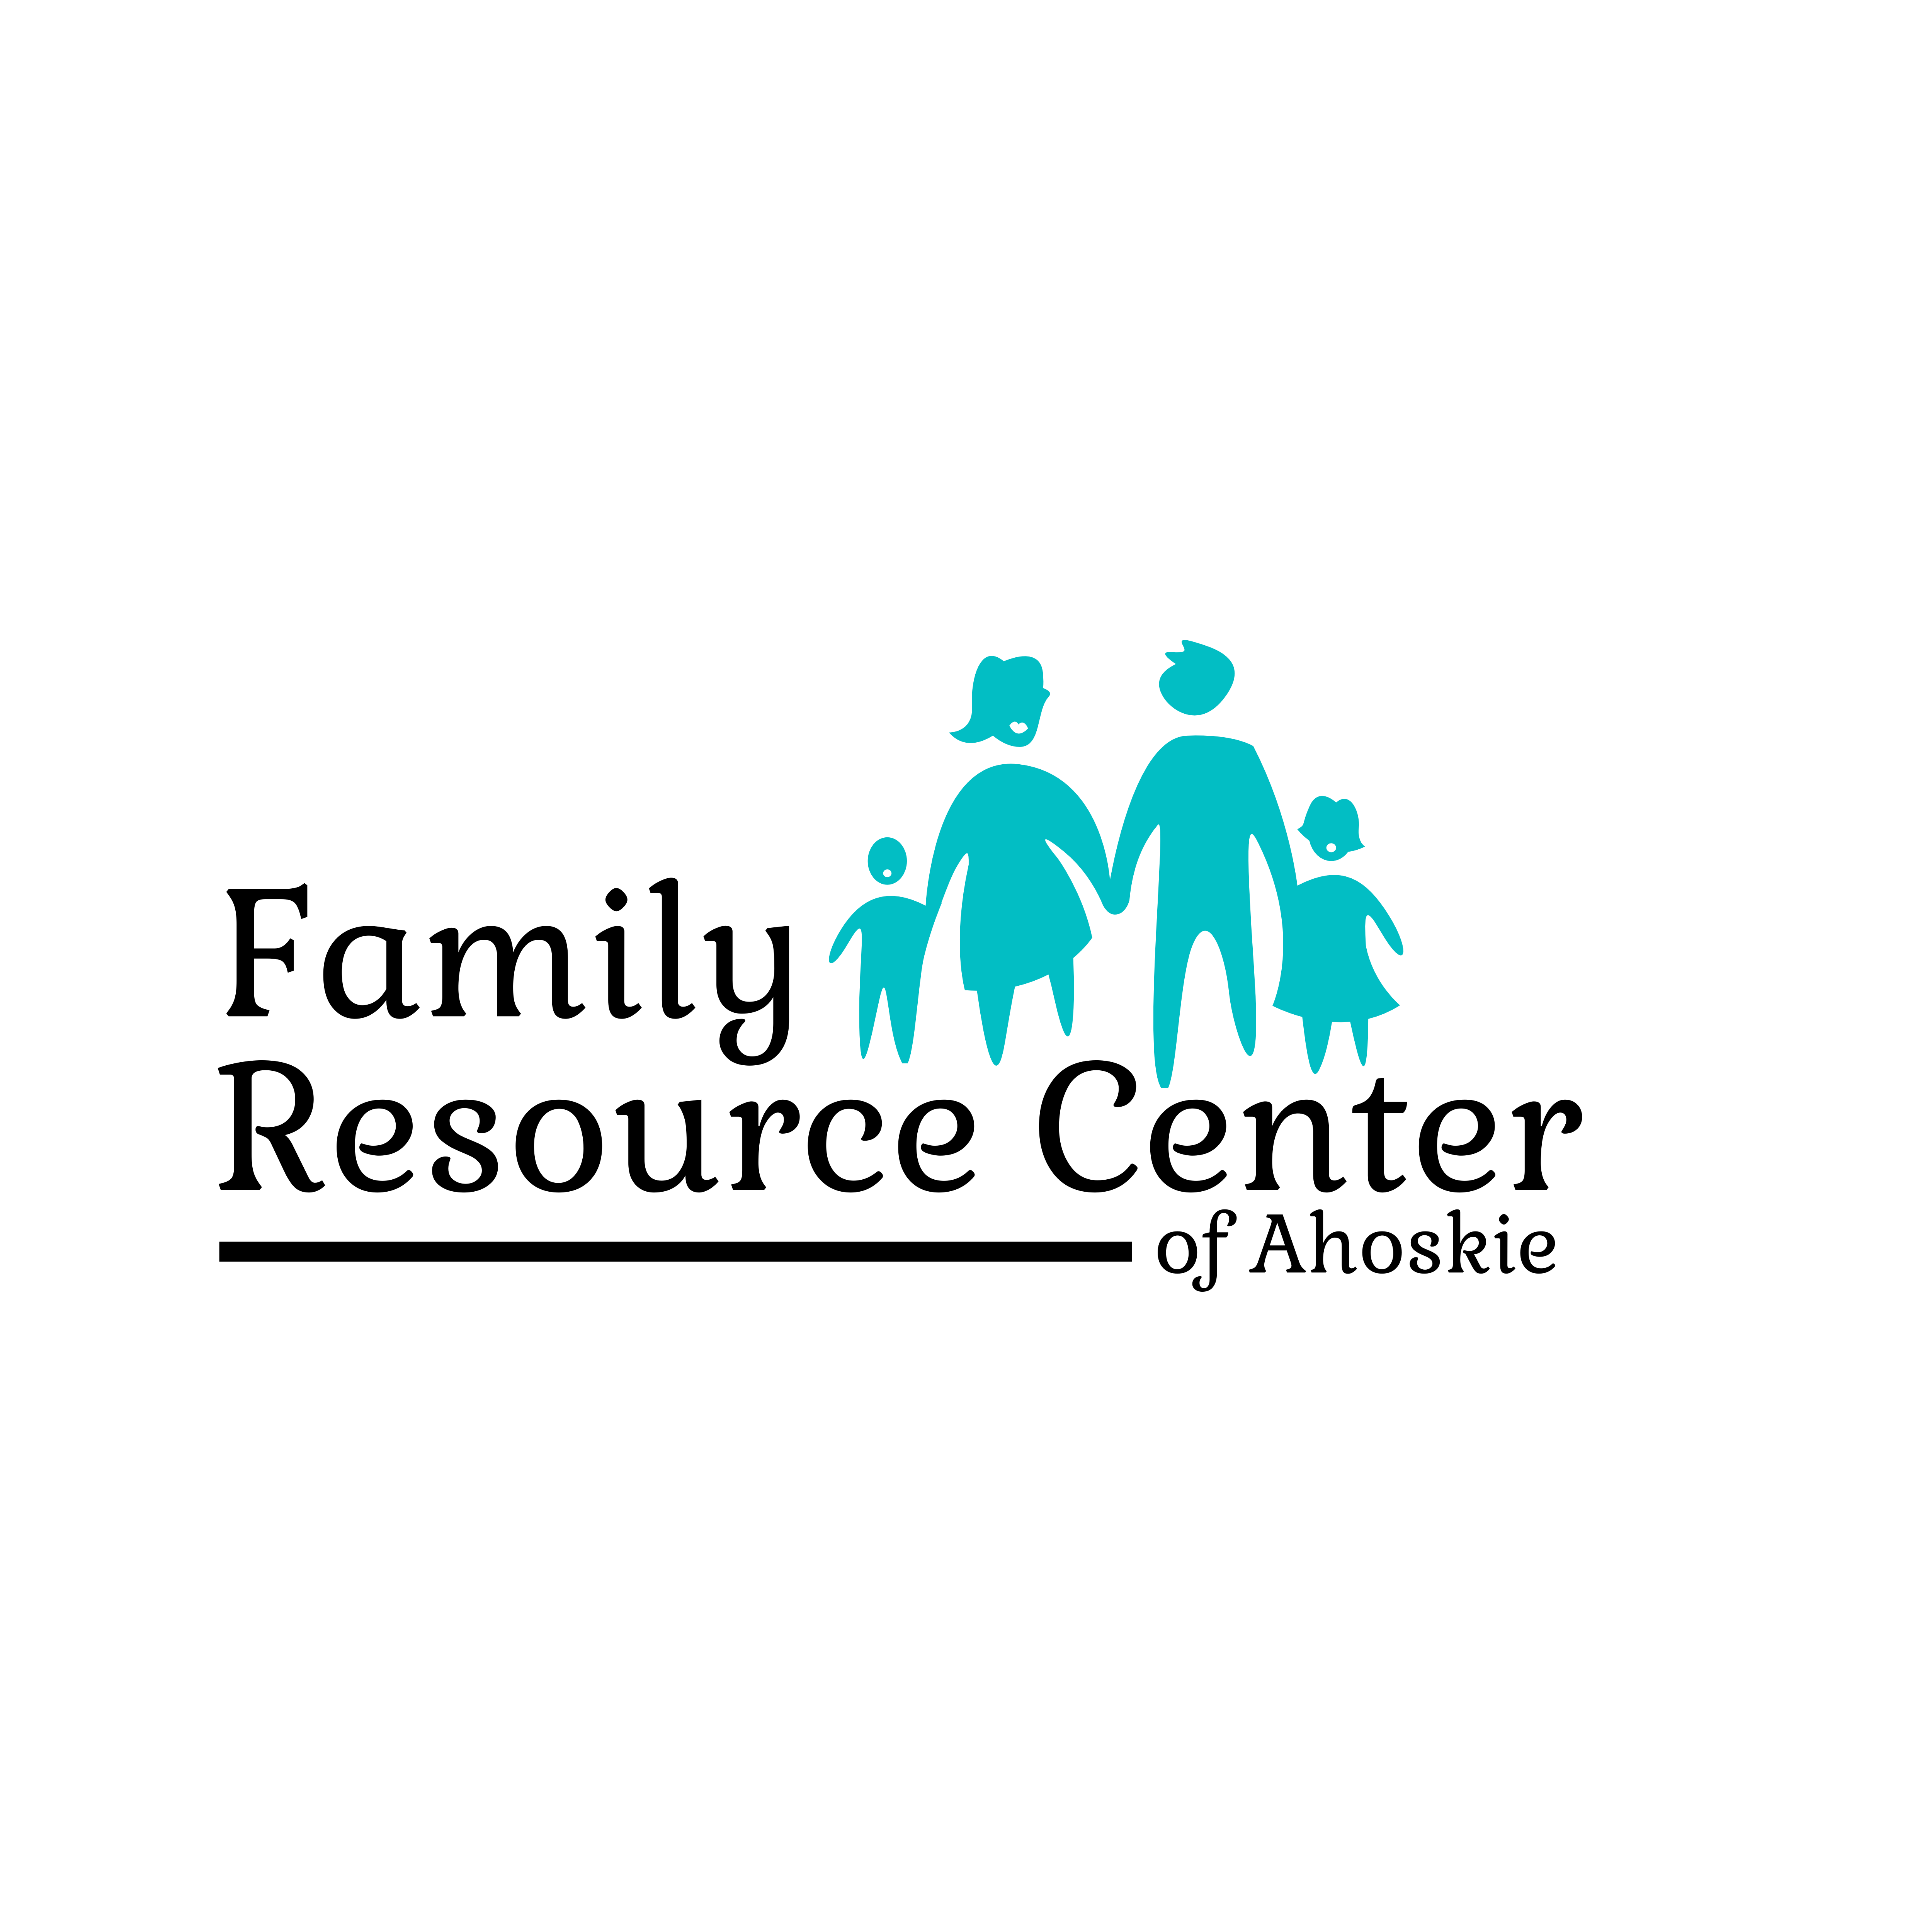 Family Resource Center of Ahoskie logo